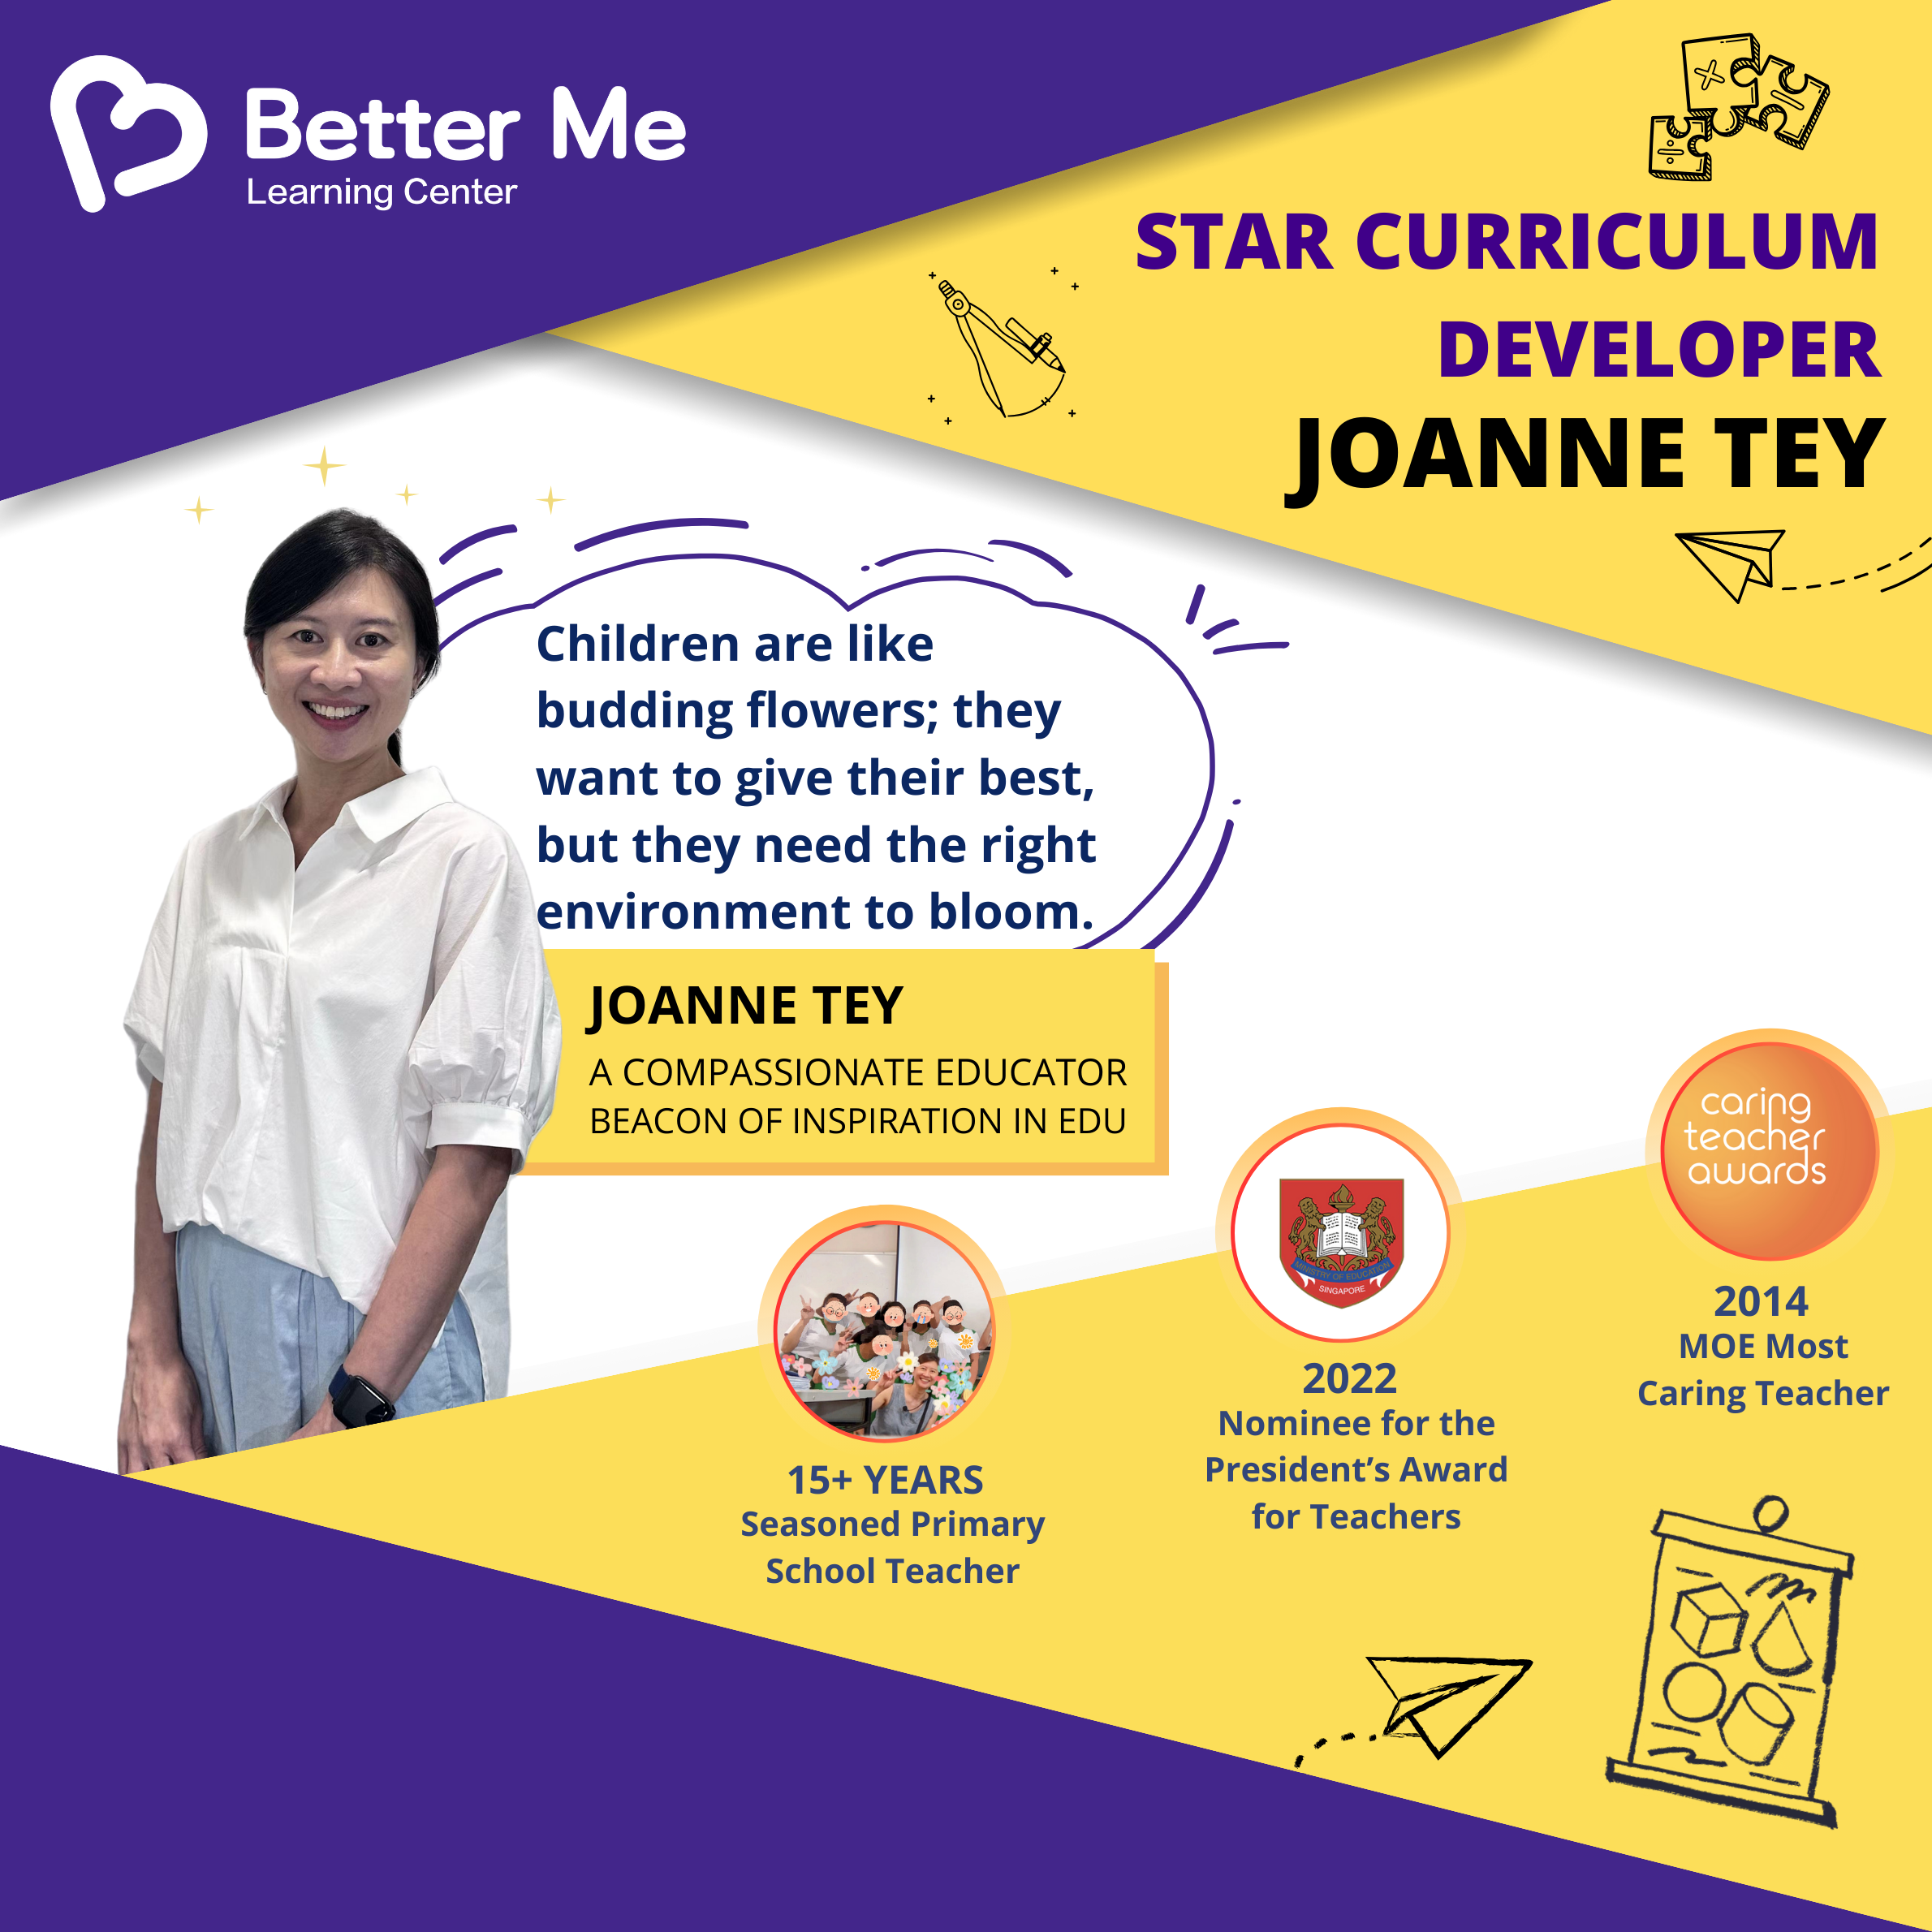 [Free Trial] PSLE Math Trial from Better Me Singapore